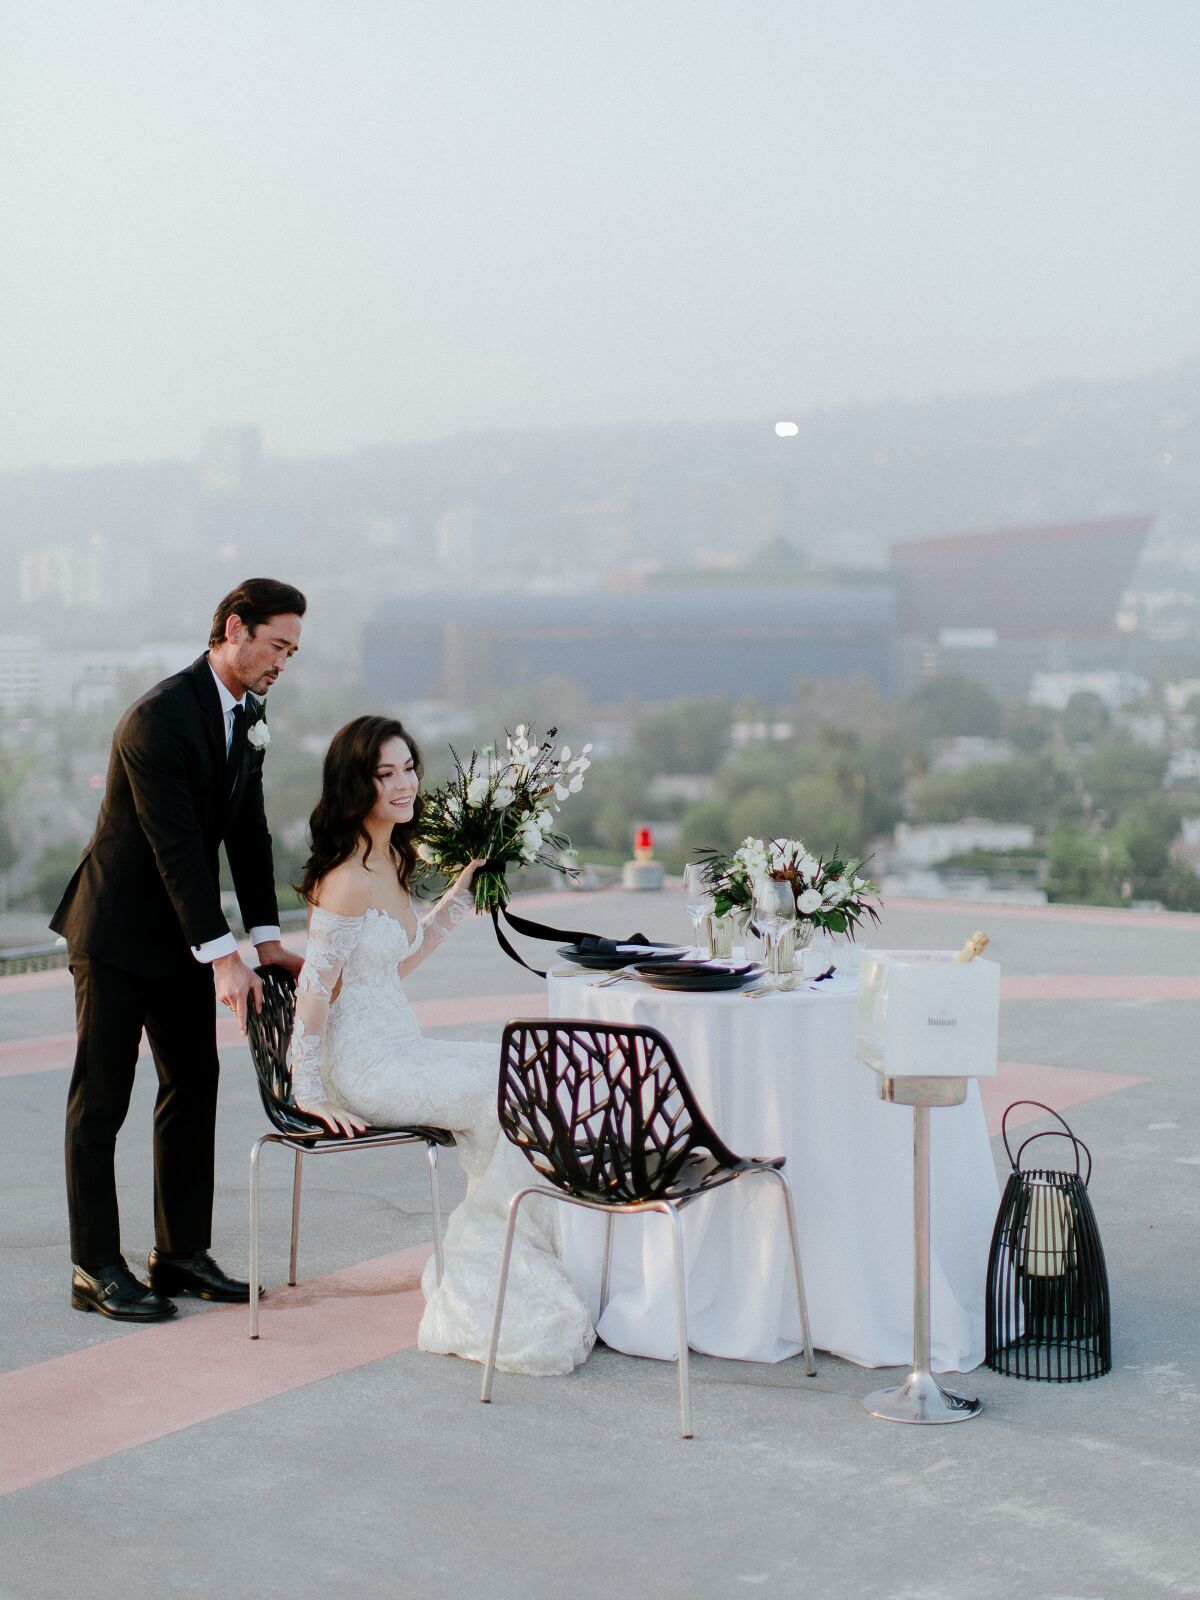 A helipad wedding at Sofitel Los Angeles at Beverly Hills offers views of downtown L.A. and the Hollywood Hills.